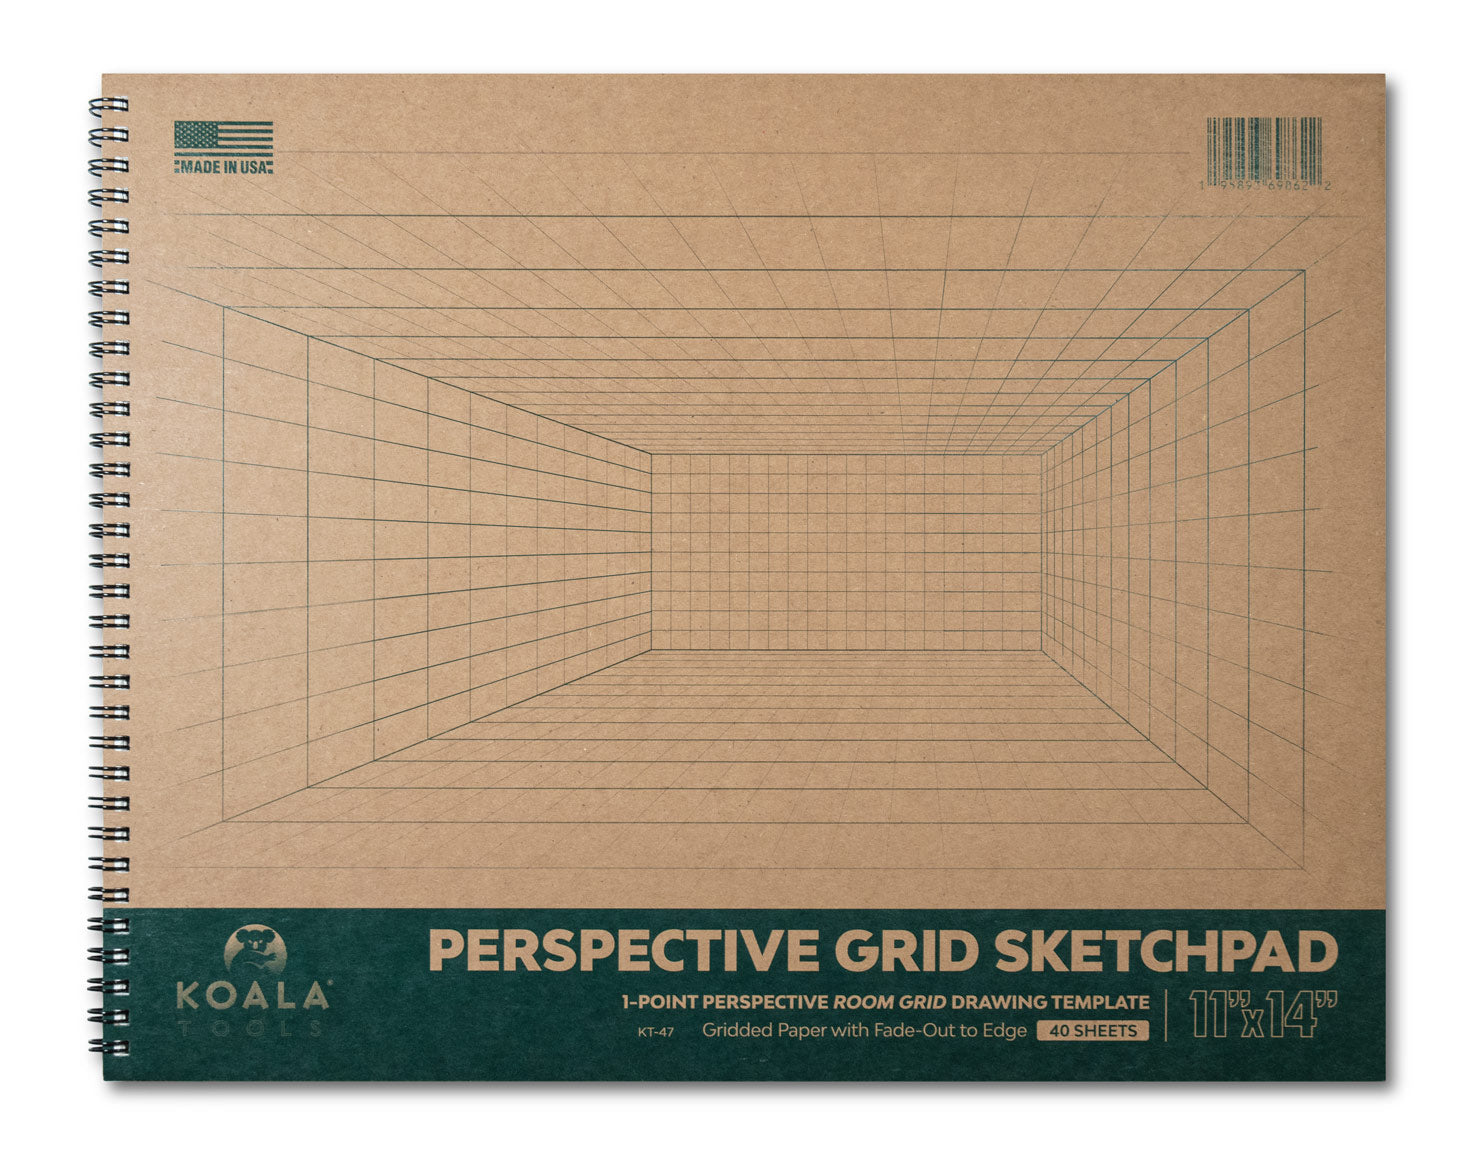 2 point perspective interior grid